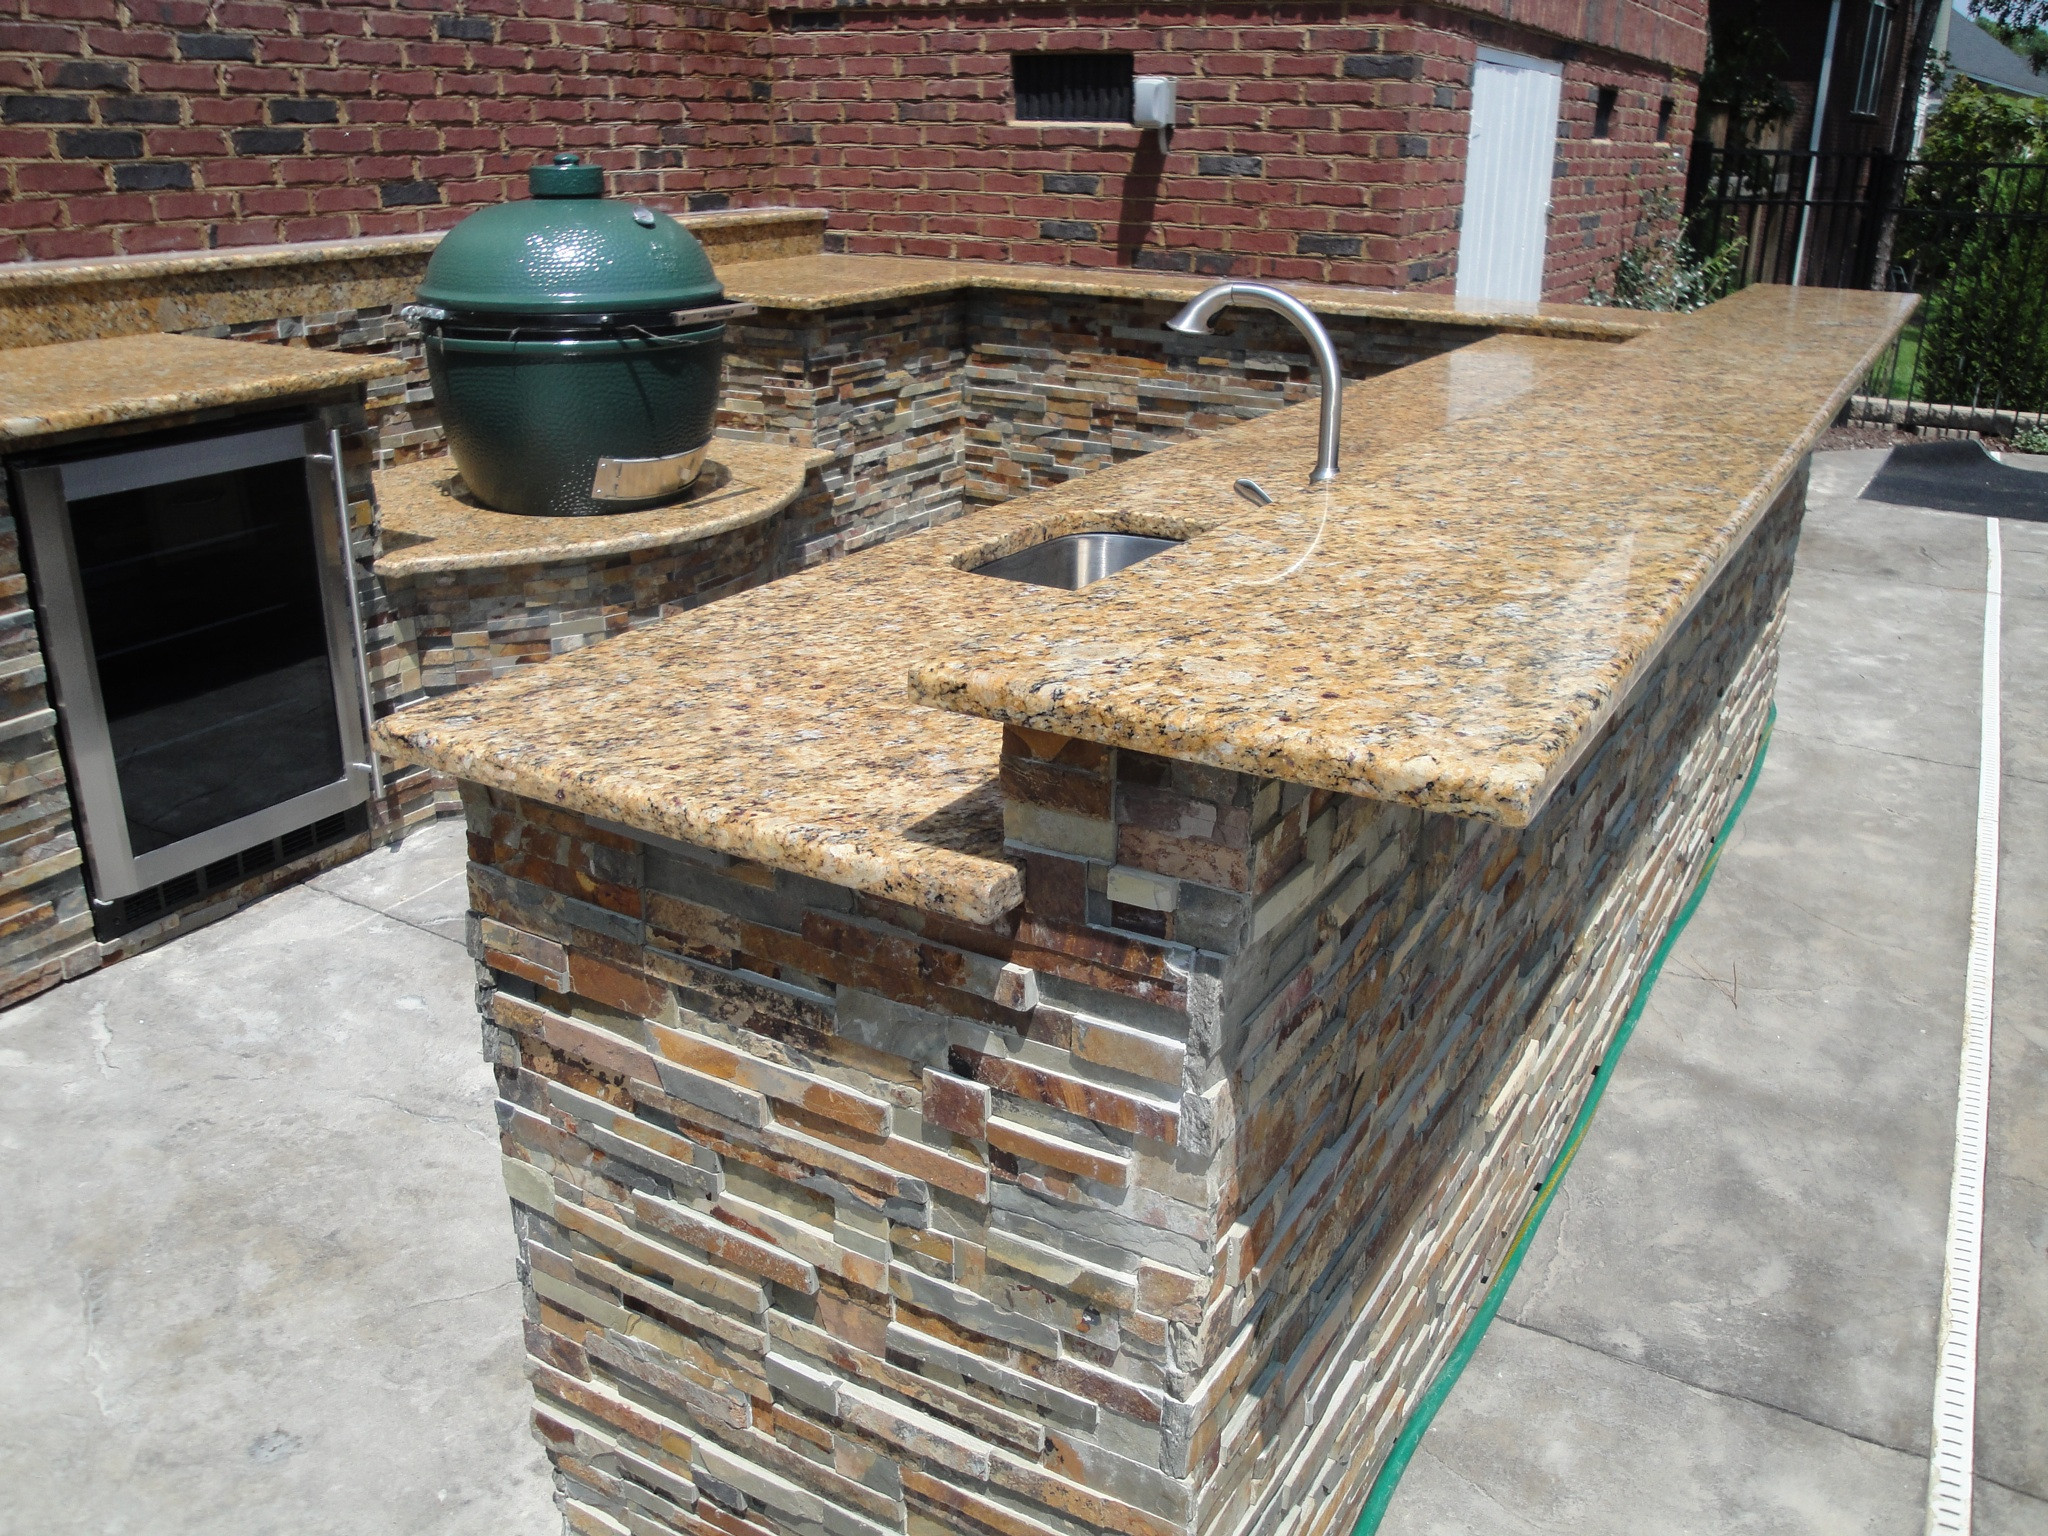 Green Egg Outdoor Kitchen
 Outdoor Kitchen Projects Outdoor Living of New Jersey